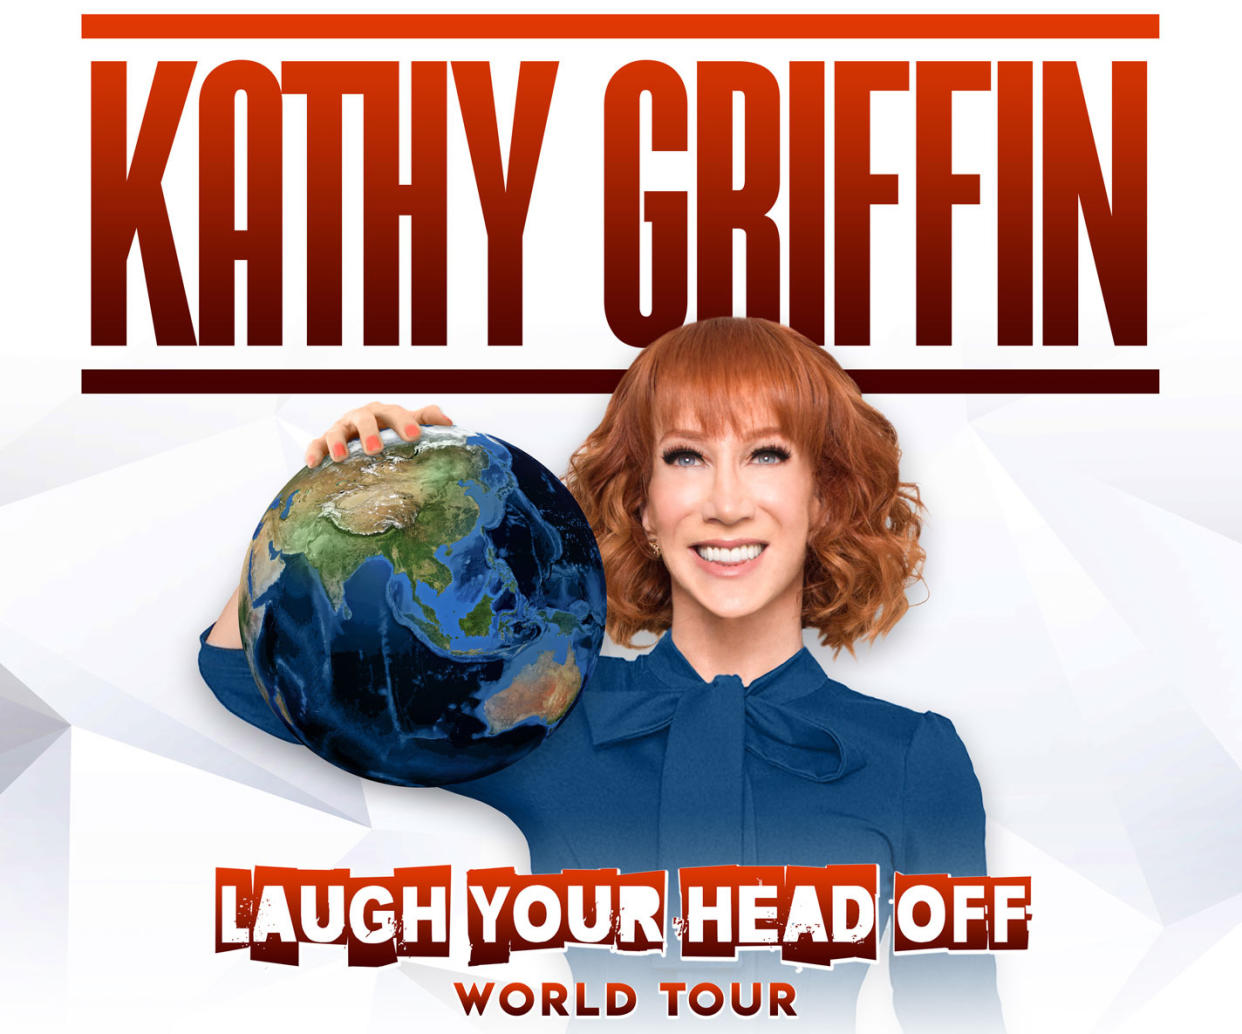 Kathy Griffin will perform in Singapore at the Star Theatre on 3 November 2017. (Photo: LA Comedy Live)